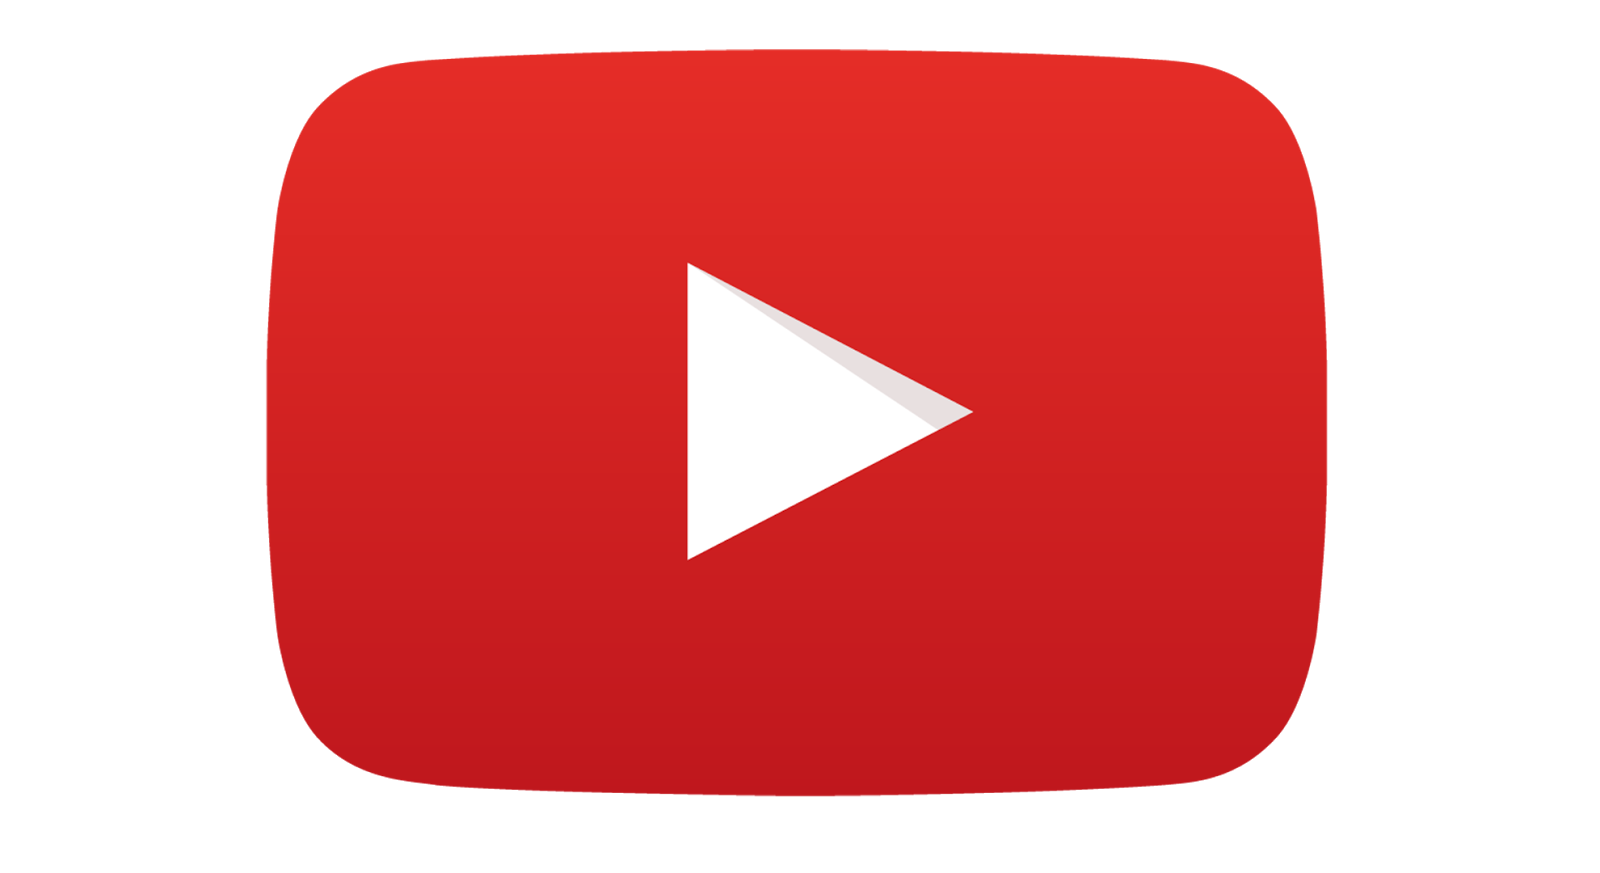 Youtube Logo PNG, Youtube Logo Transparent Background  FreeIconsPNG